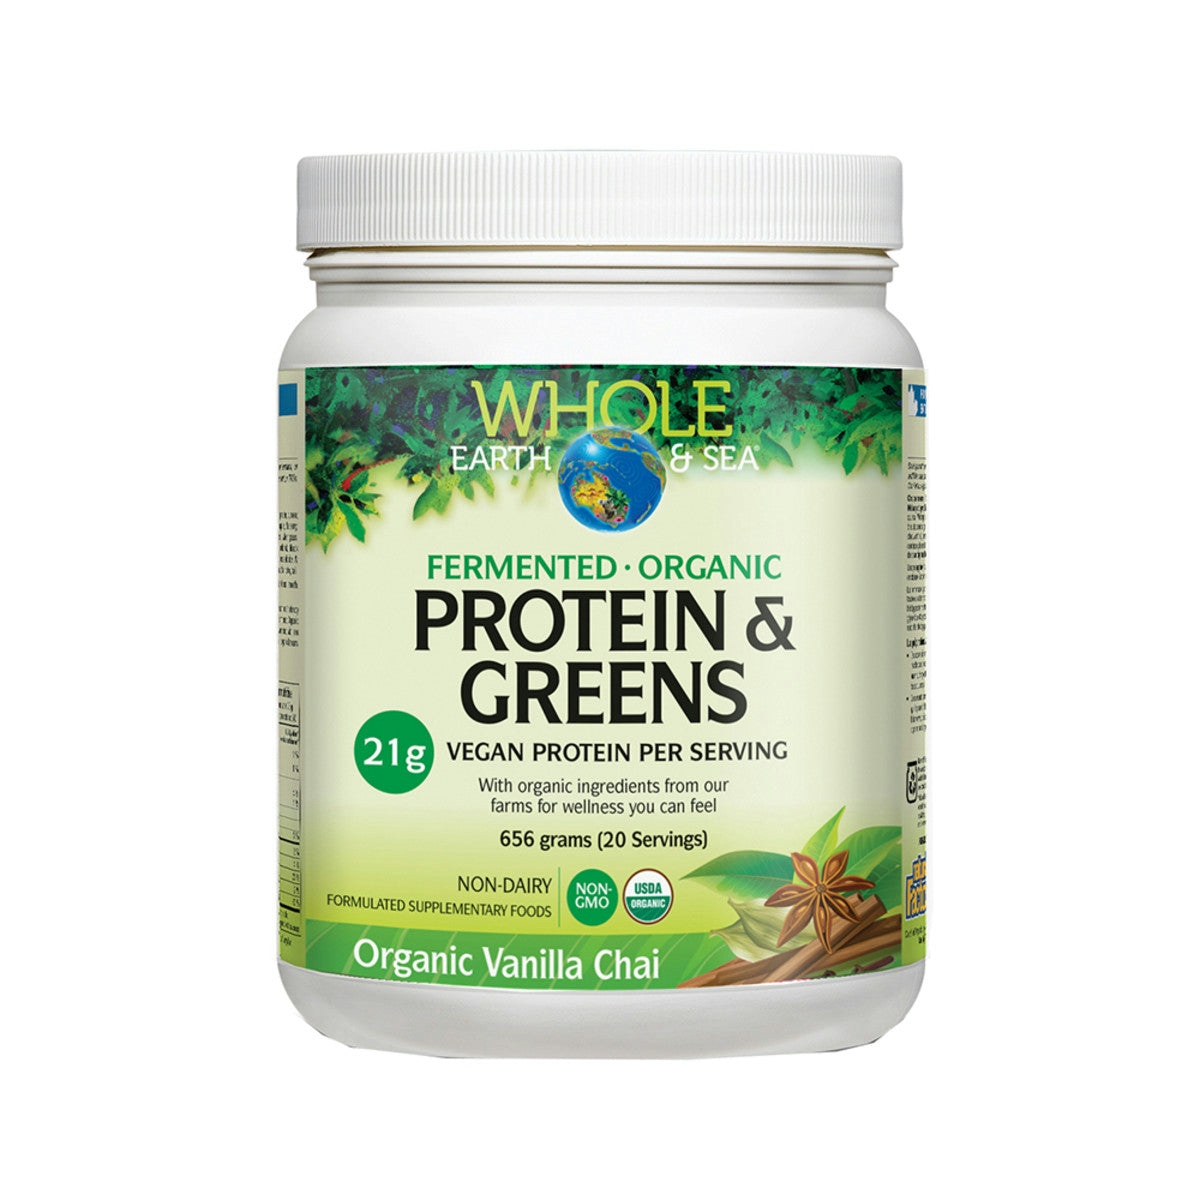 image of Whole Earth & Sea Protein & Greens Organic Vanilla Chai 656g on white background 